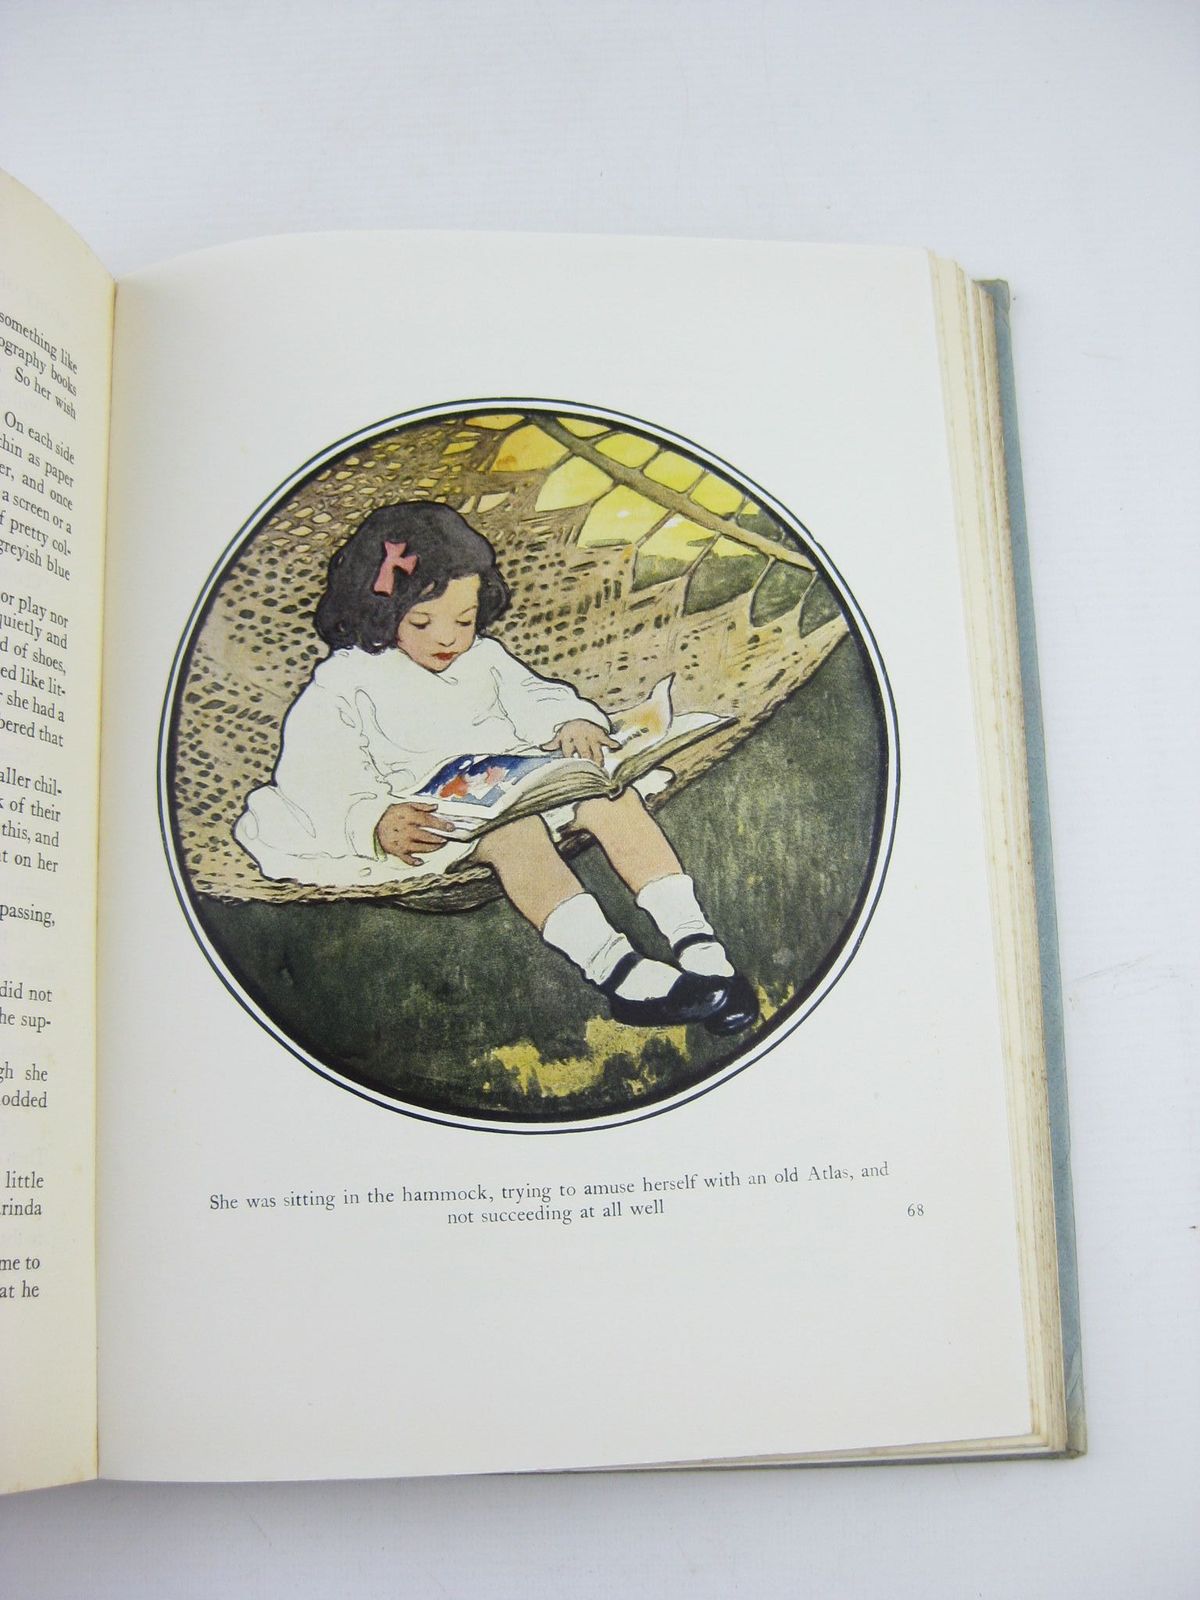 Photo of THE EVERYDAY FAIRY BOOK written by Chapin, Anna Alice illustrated by Smith, Jessie Willcox published by J. Coker & Co. Ltd. (STOCK CODE: 1311333)  for sale by Stella & Rose's Books